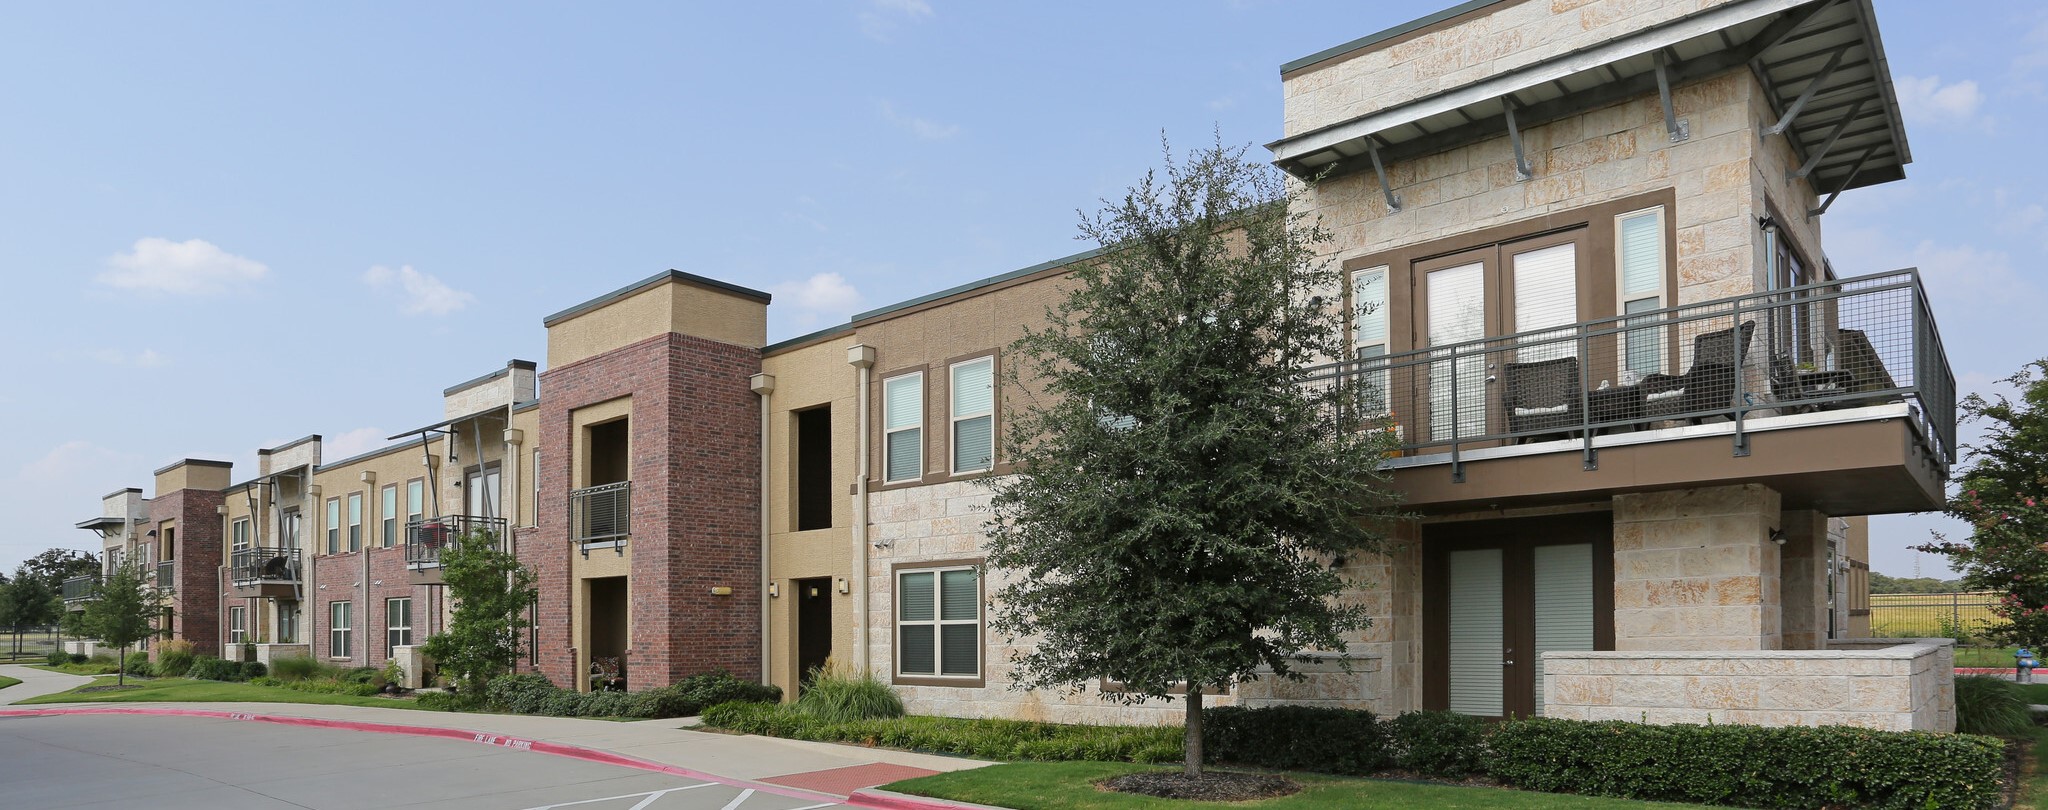 1, 2, and 3-bedroom Apartments for Rent in Corinth, TX